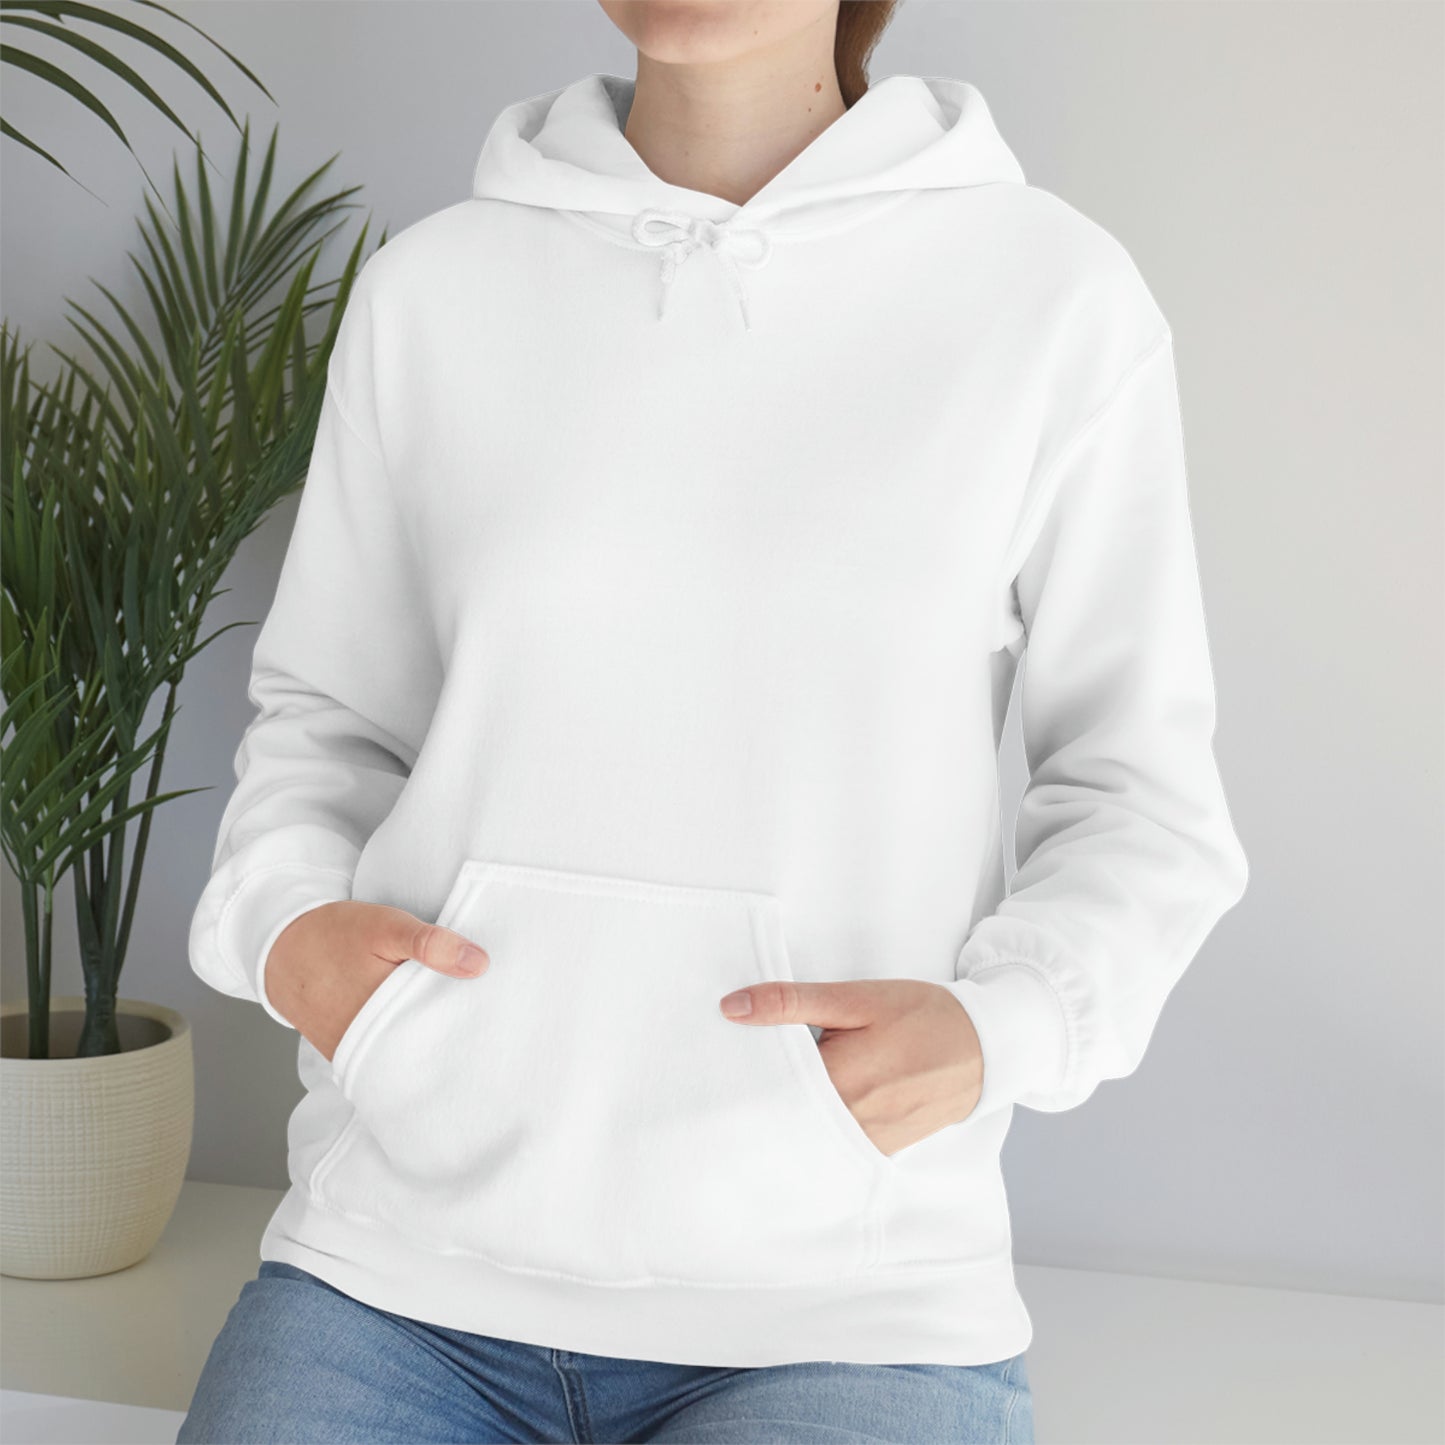 "Class Of 2023" Hoodie - Weave Got Gifts - Unique Gifts You Won’t Find Anywhere Else!